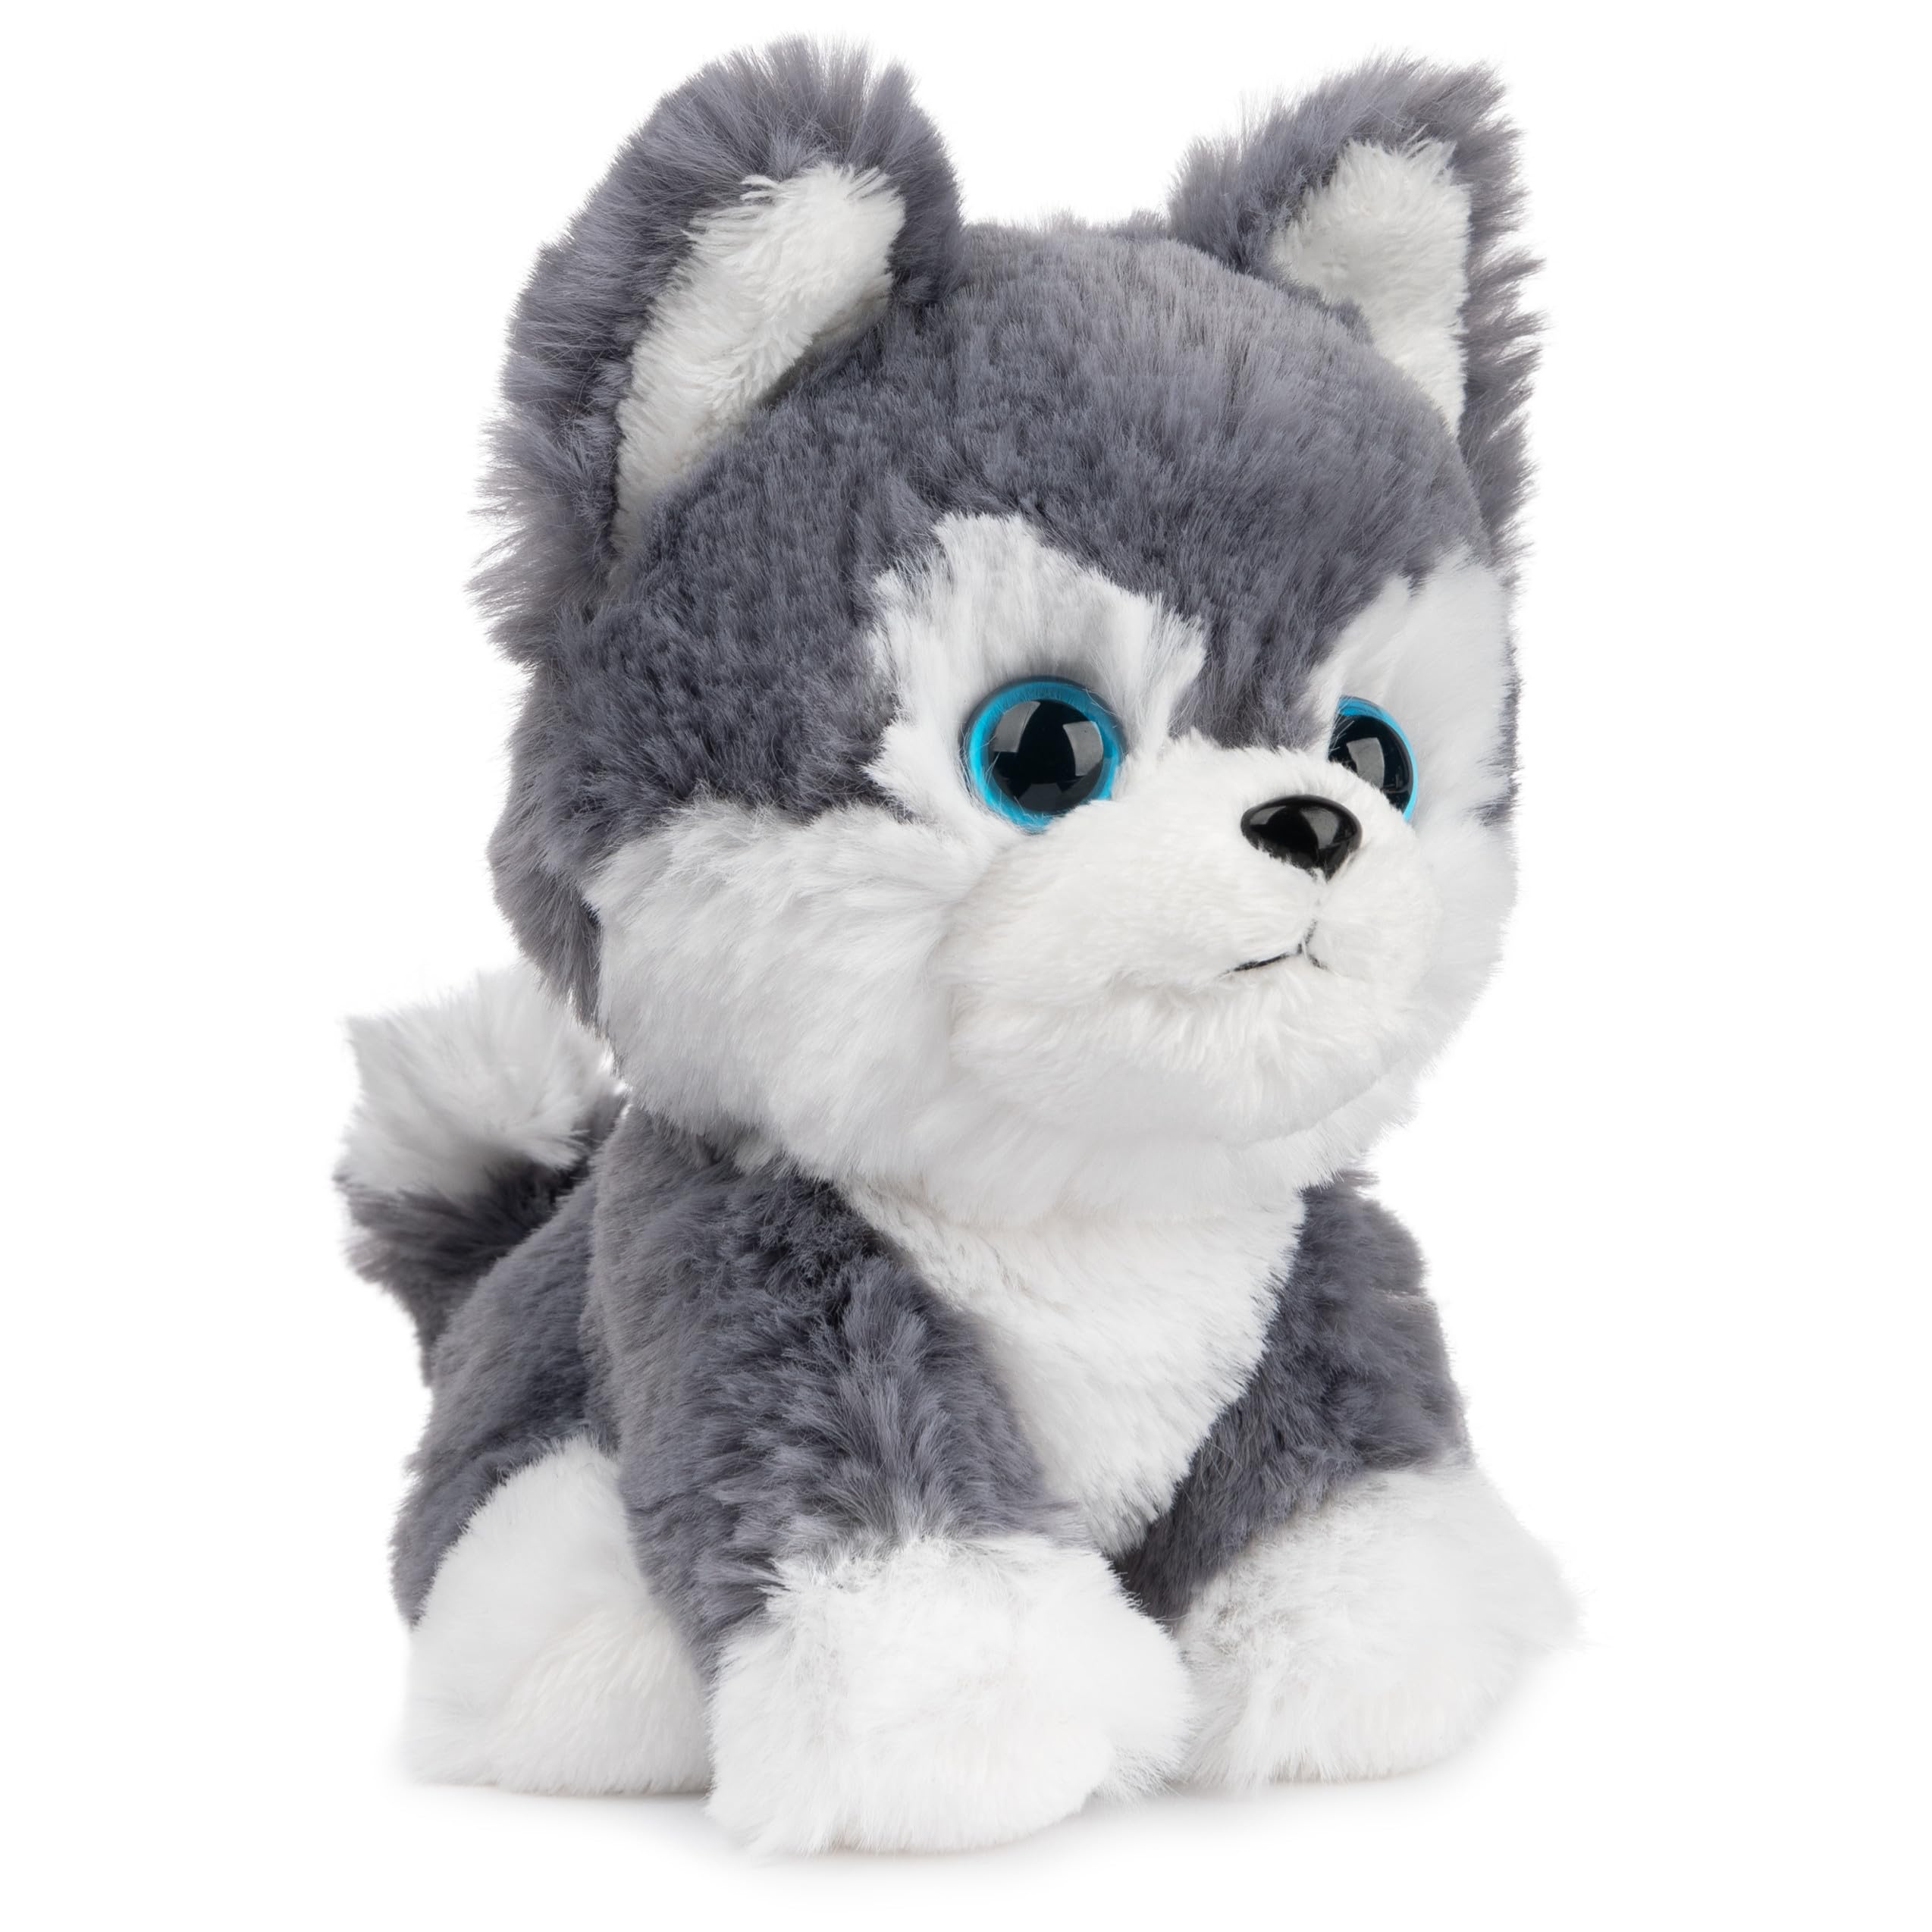 GUND Boo, The World's Cutest Dog, Boo & Friends Collection